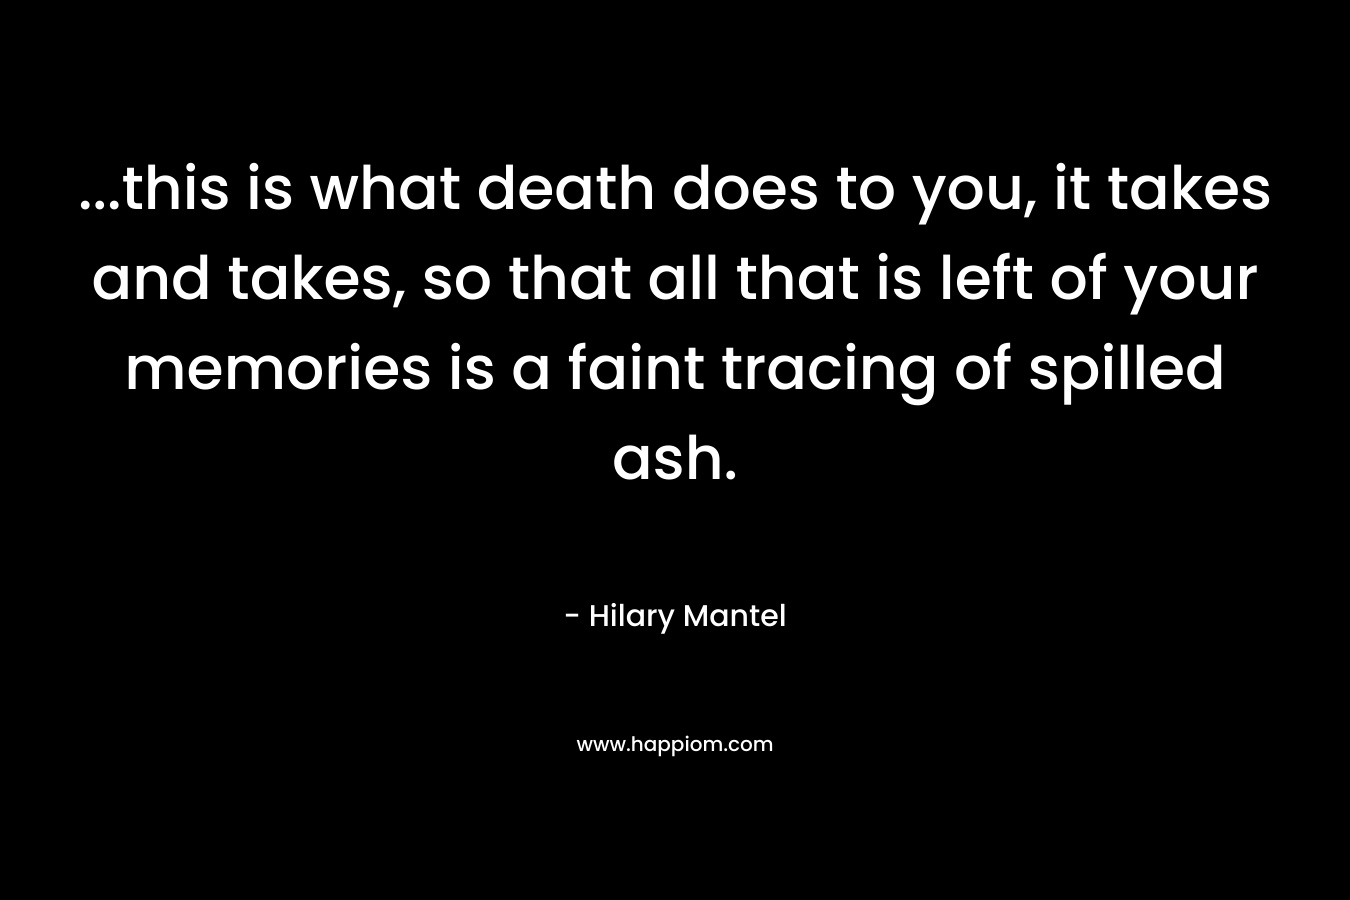 …this is what death does to you, it takes and takes, so that all that is left of your memories is a faint tracing of spilled ash. – Hilary Mantel